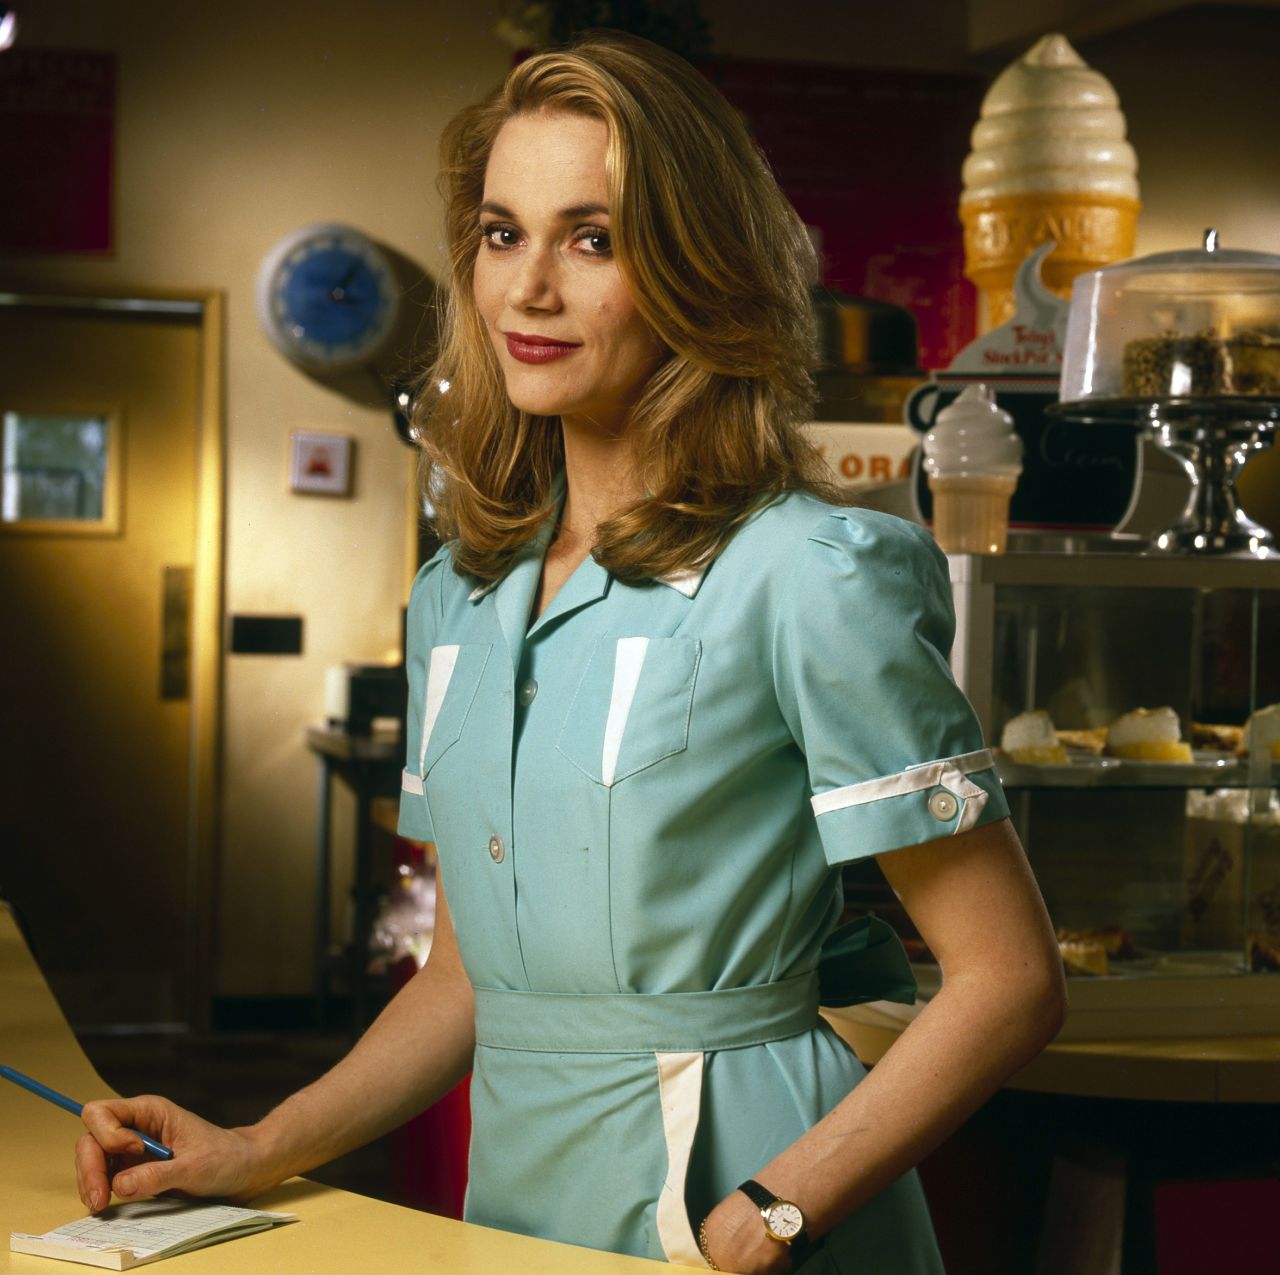 <a href="https://www.cnn.com/2019/05/12/us/peggy-lipton-dies-of-cancer/index.html" target="_blank">Peggy Lipton</a>, an award-winning actress who starred in the television shows "Mod Squad" and "Twin Peaks," died of cancer on May 11. She was 72.